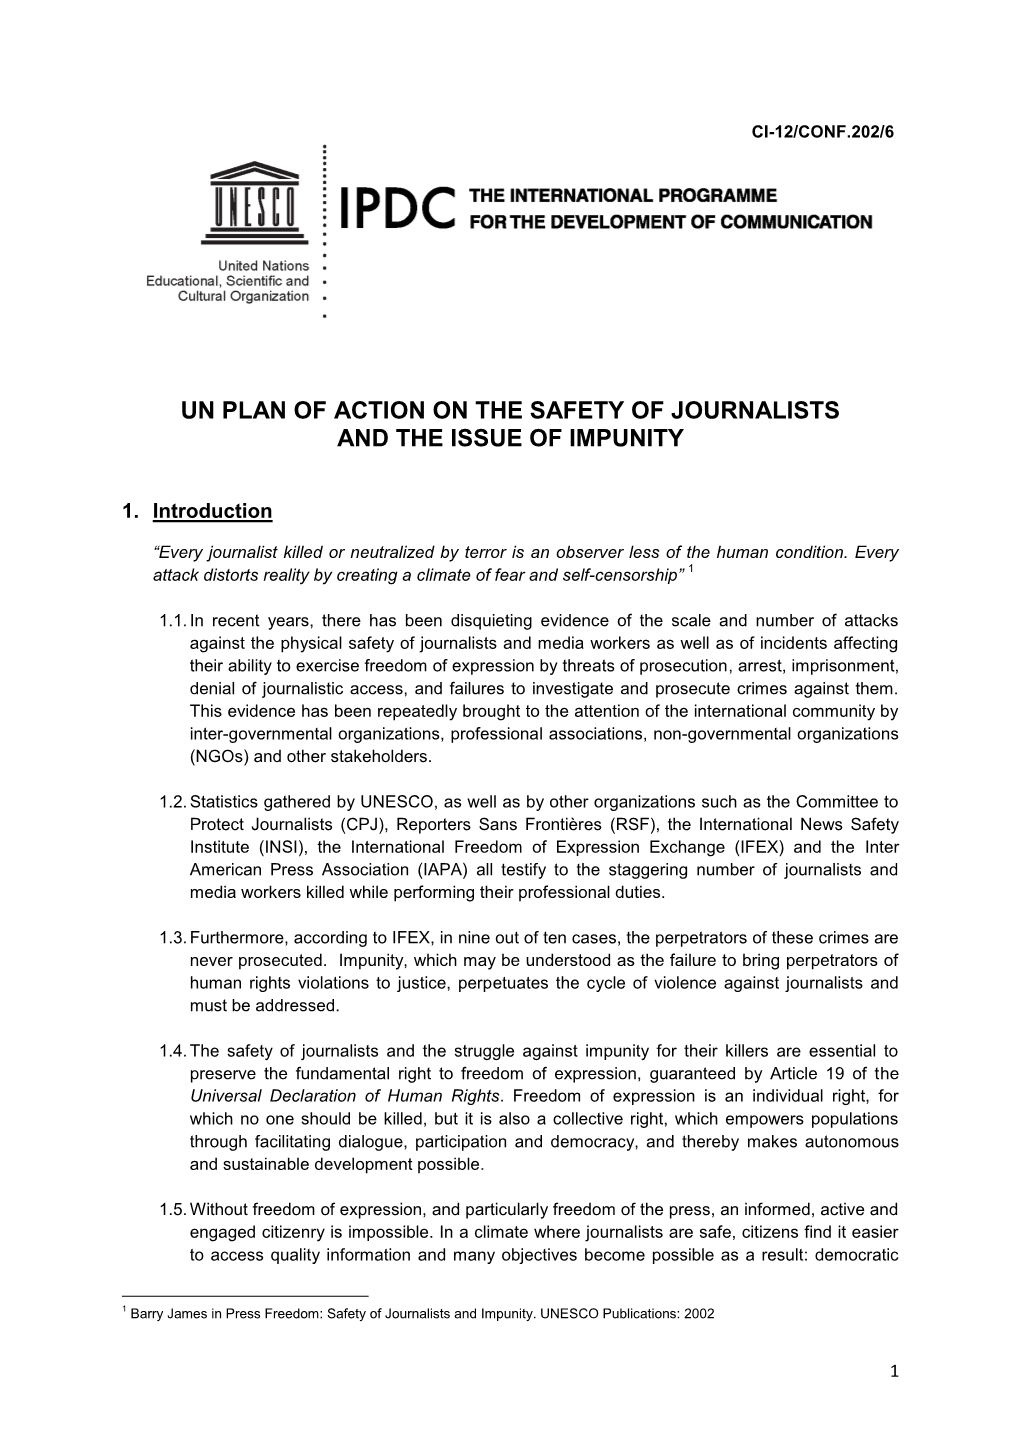 Un Plan of Action on the Safety of Journalists and the Issue of Impunity